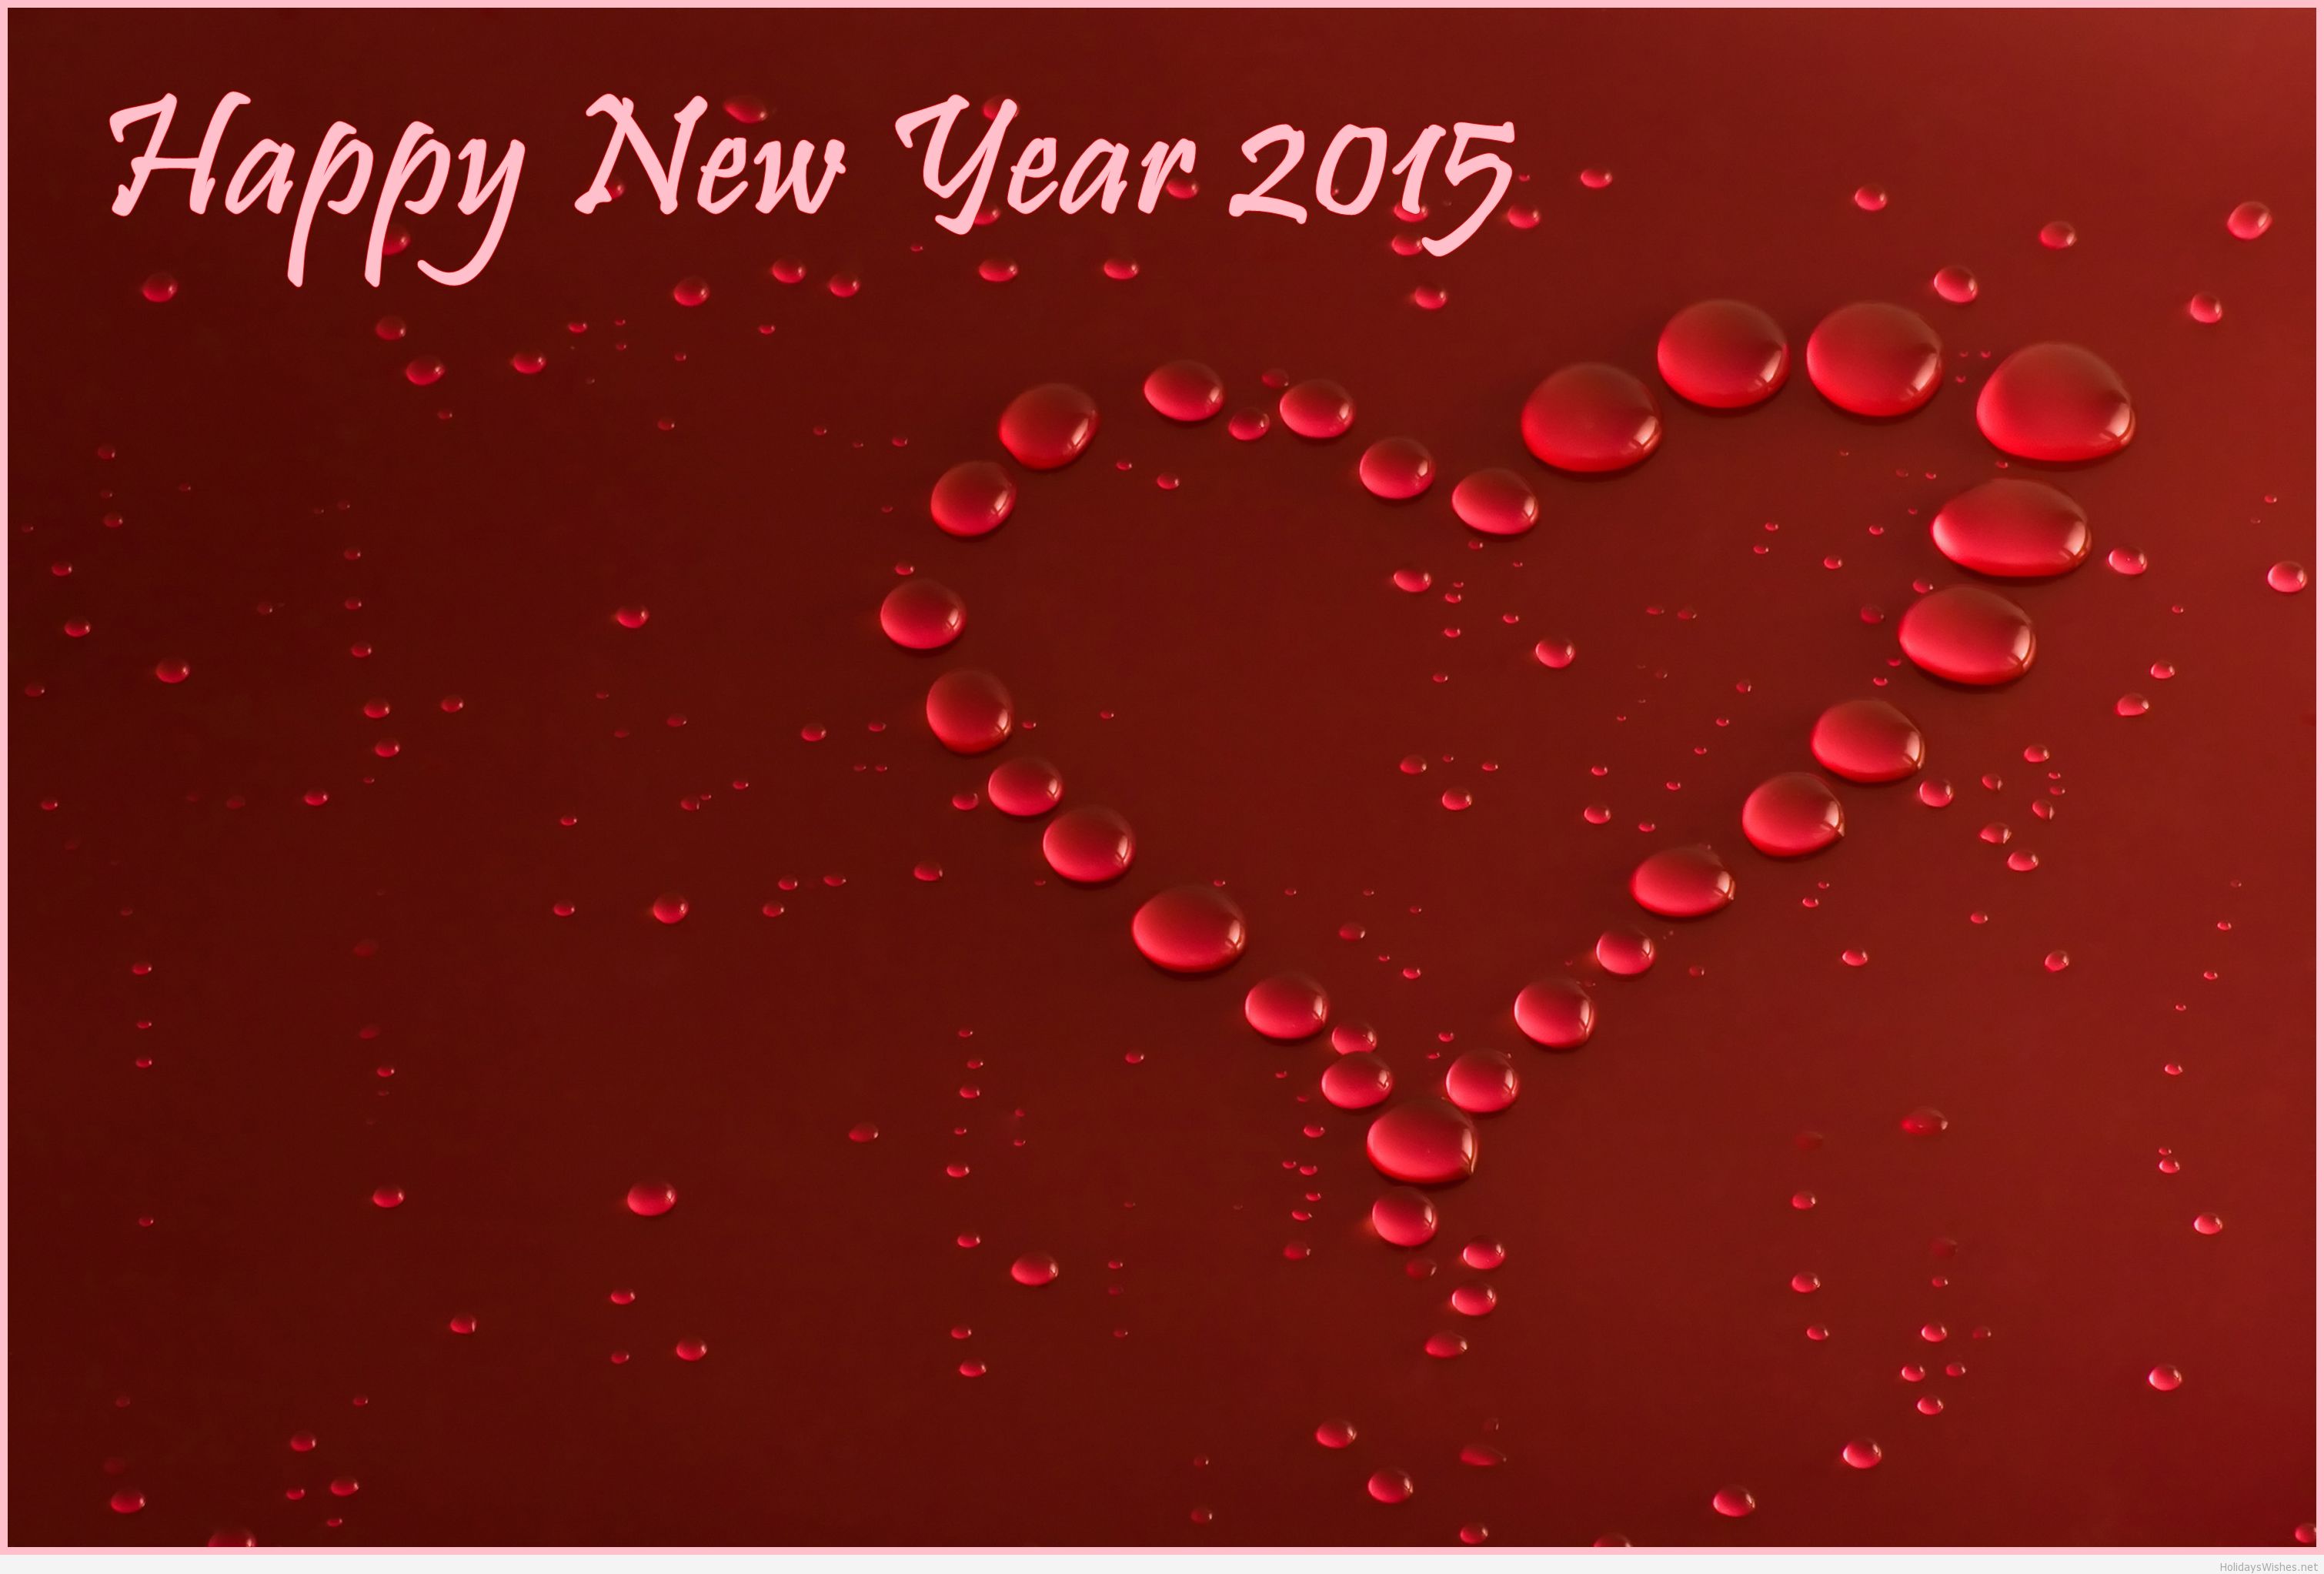 Happy New Year Love Wallpaper On